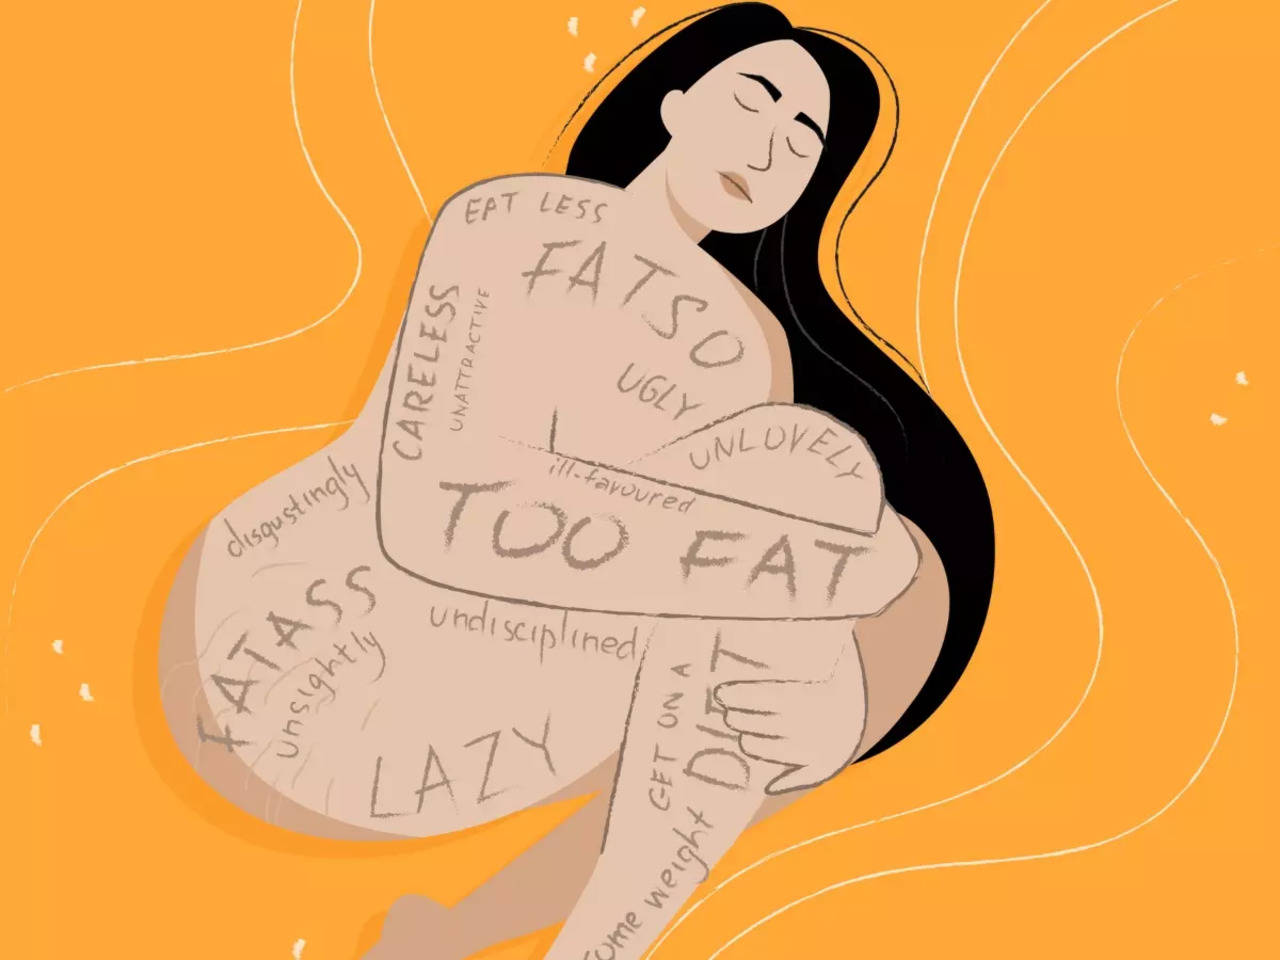 His Story/Her Story “My husband fat shames me in front of everyone” pic